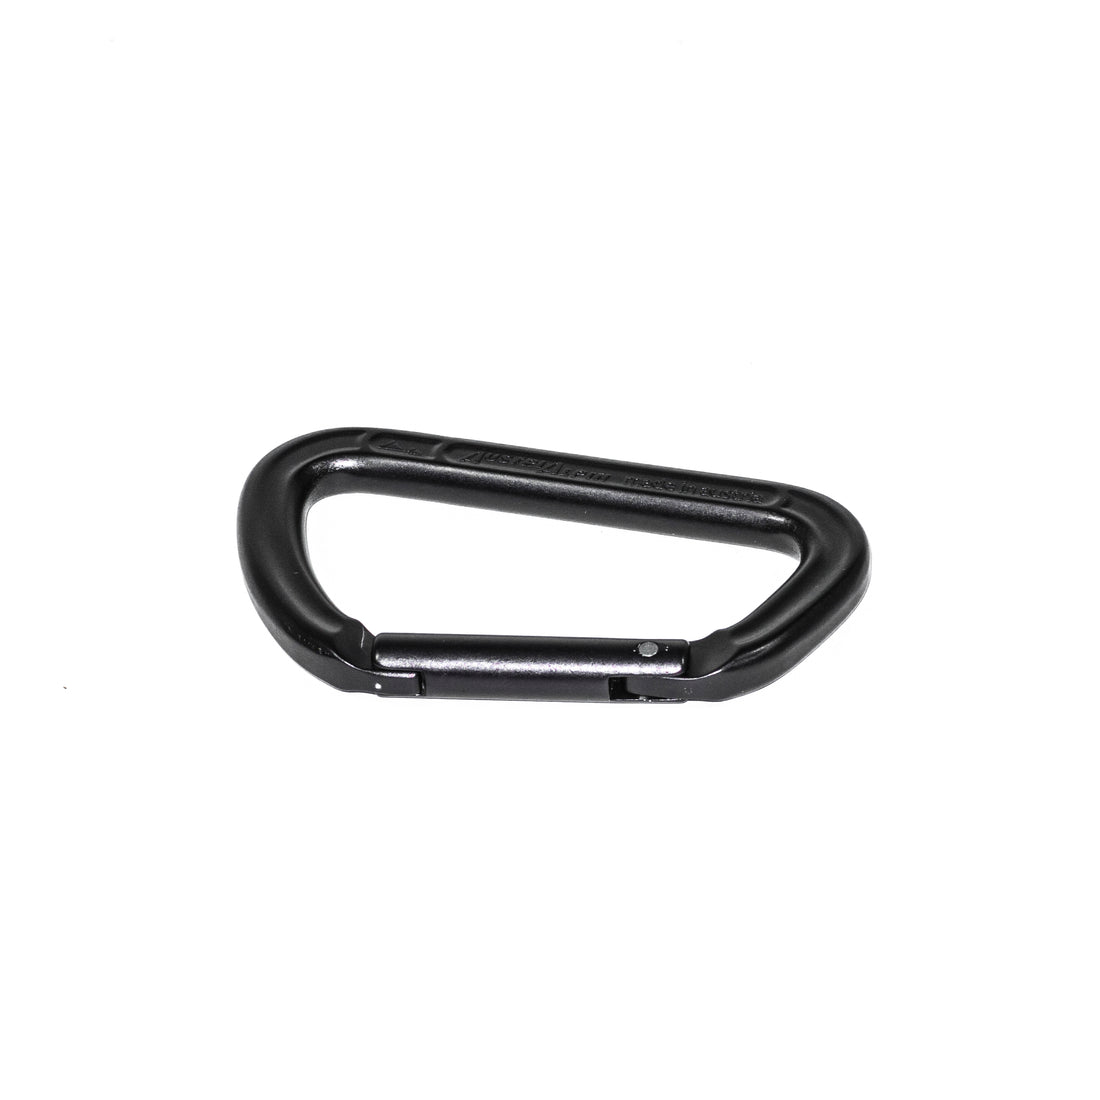 Filmsticks Multi-Purpose Charcoal Black Carabiner D-Clip (Pack of 5) -  Spring Wire Non-Locking Carabiner Made from Aluminium Alloy